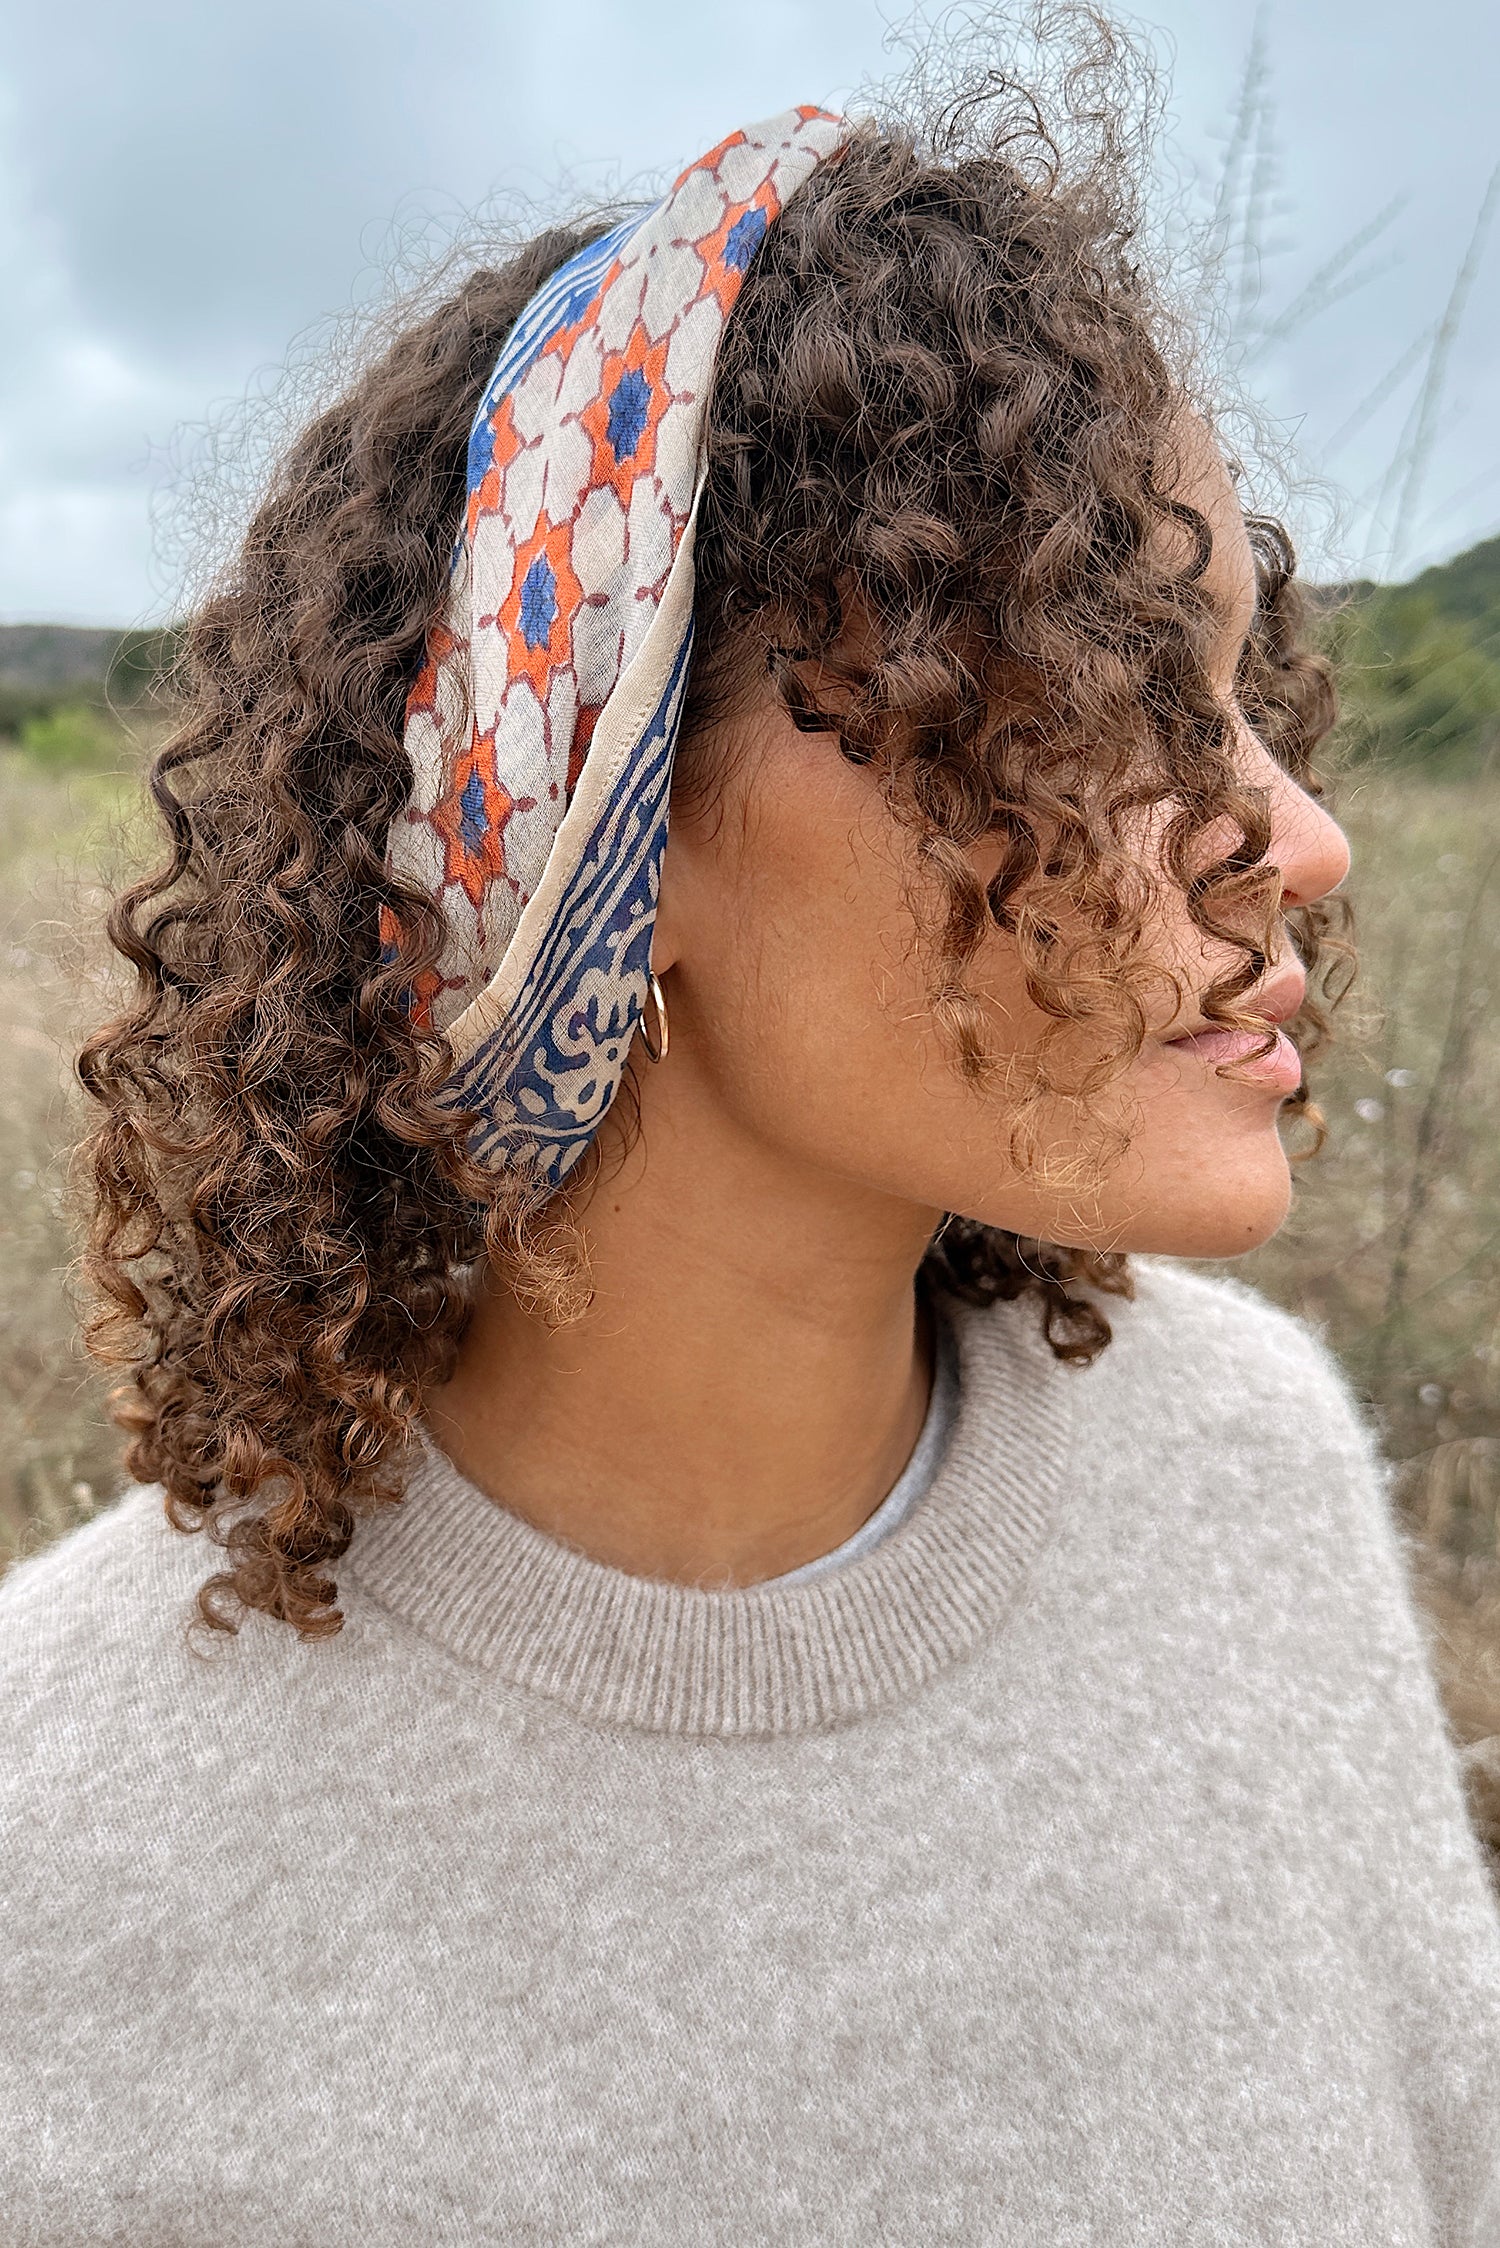 Woman wearing a tan sweater, standing in a field, with the block print Jane cotton bandana tied around her hair as a headband.